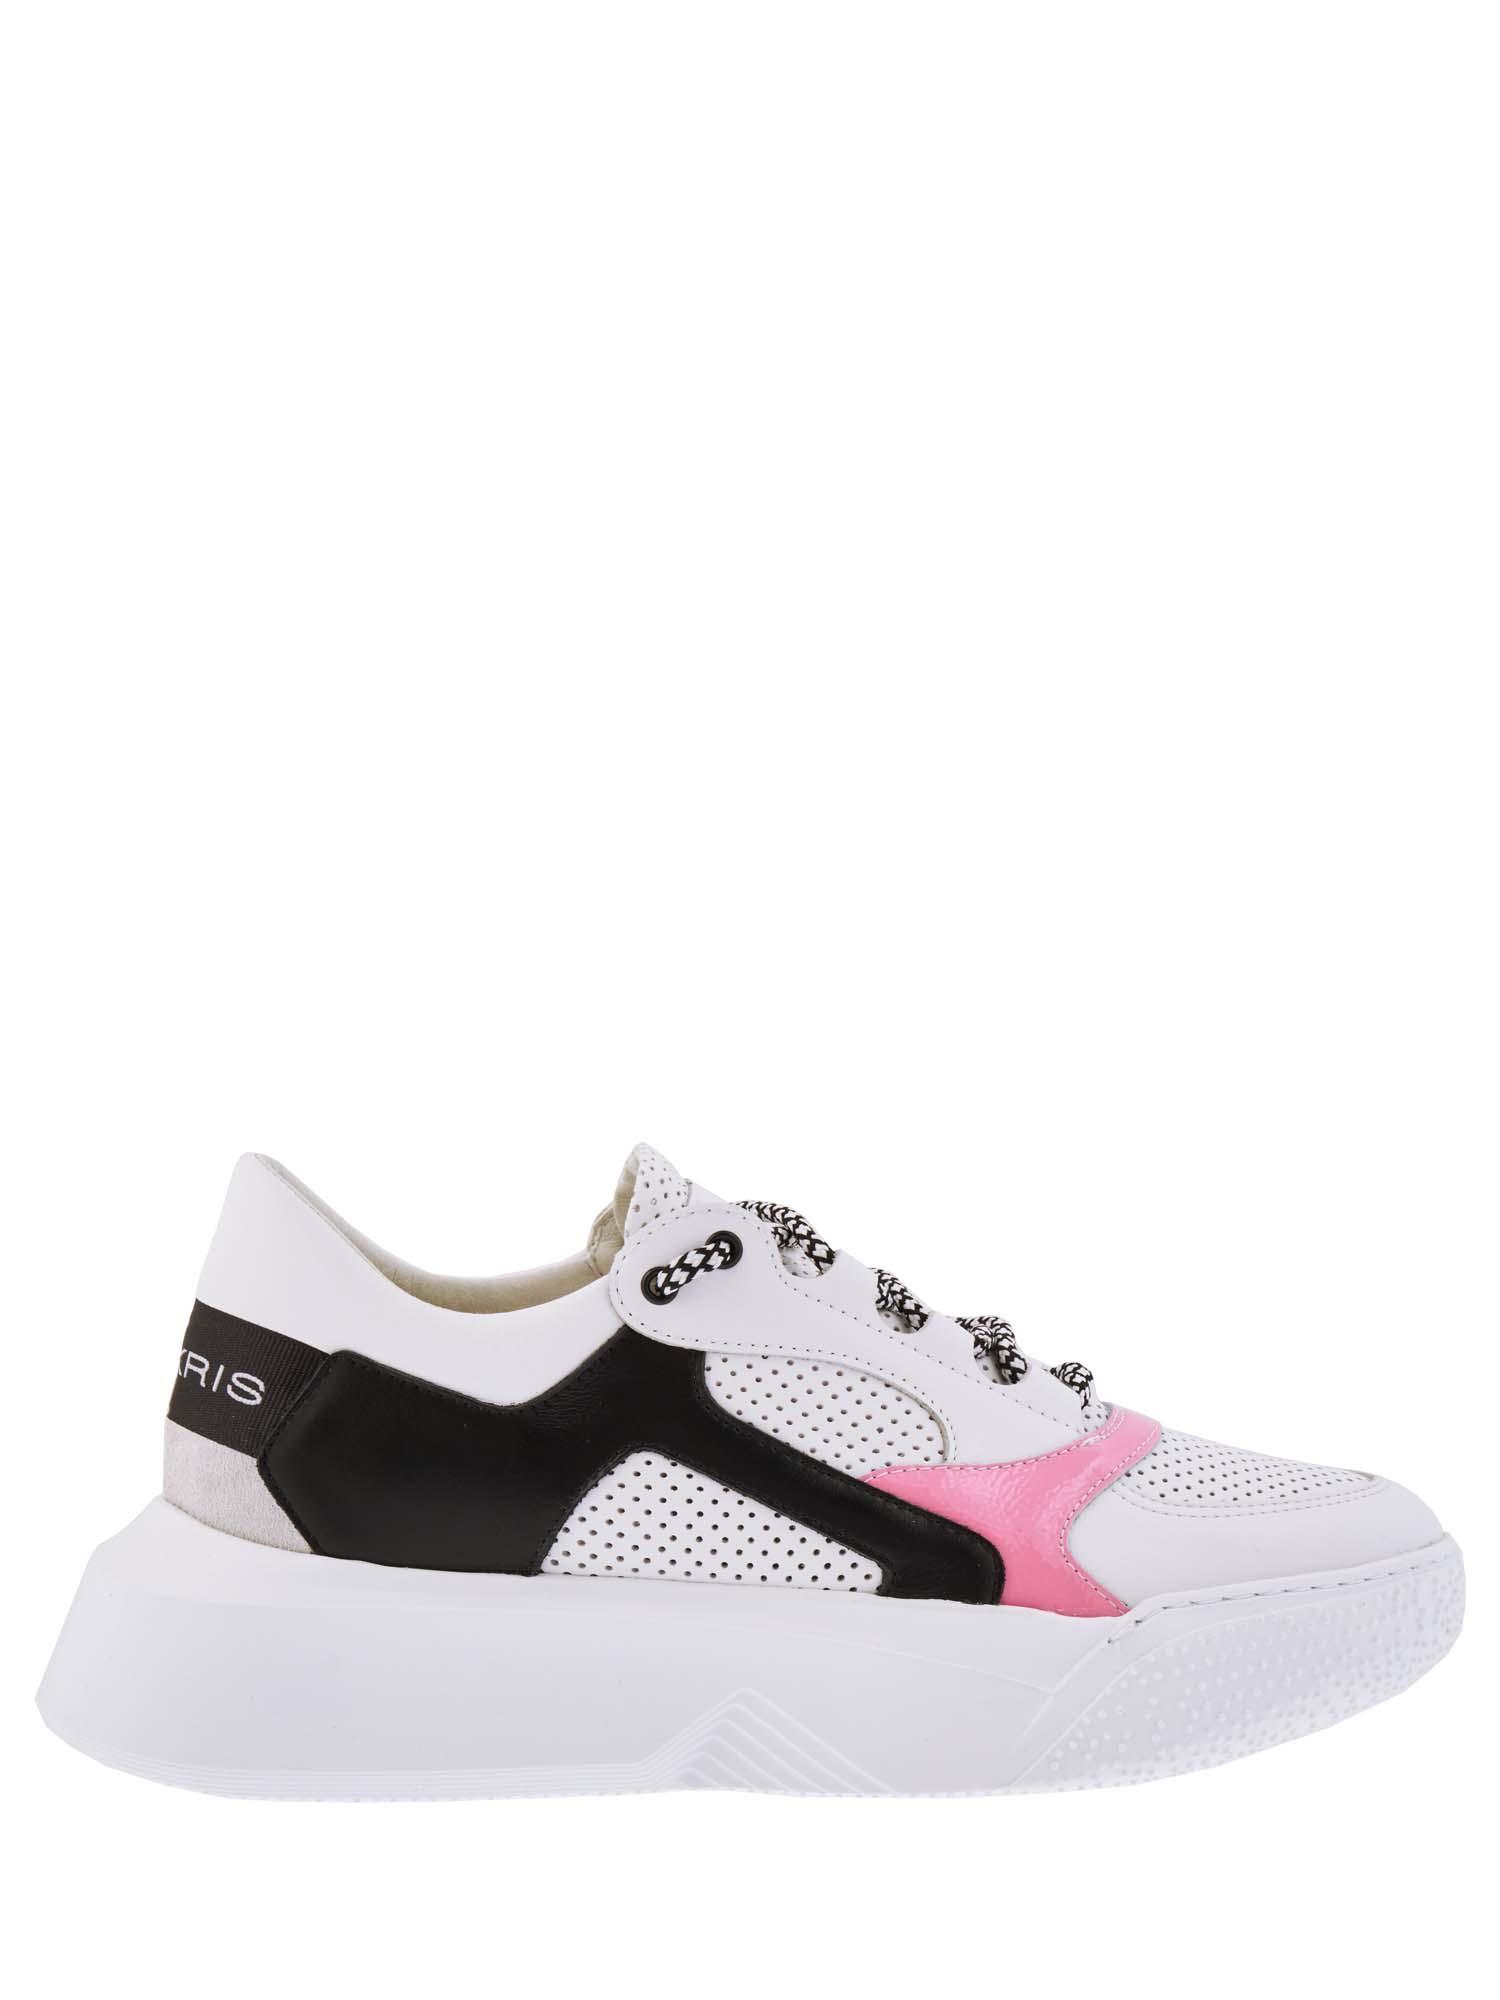 MAKRIS WHITE AND PINK LEATHER SNEAKERS